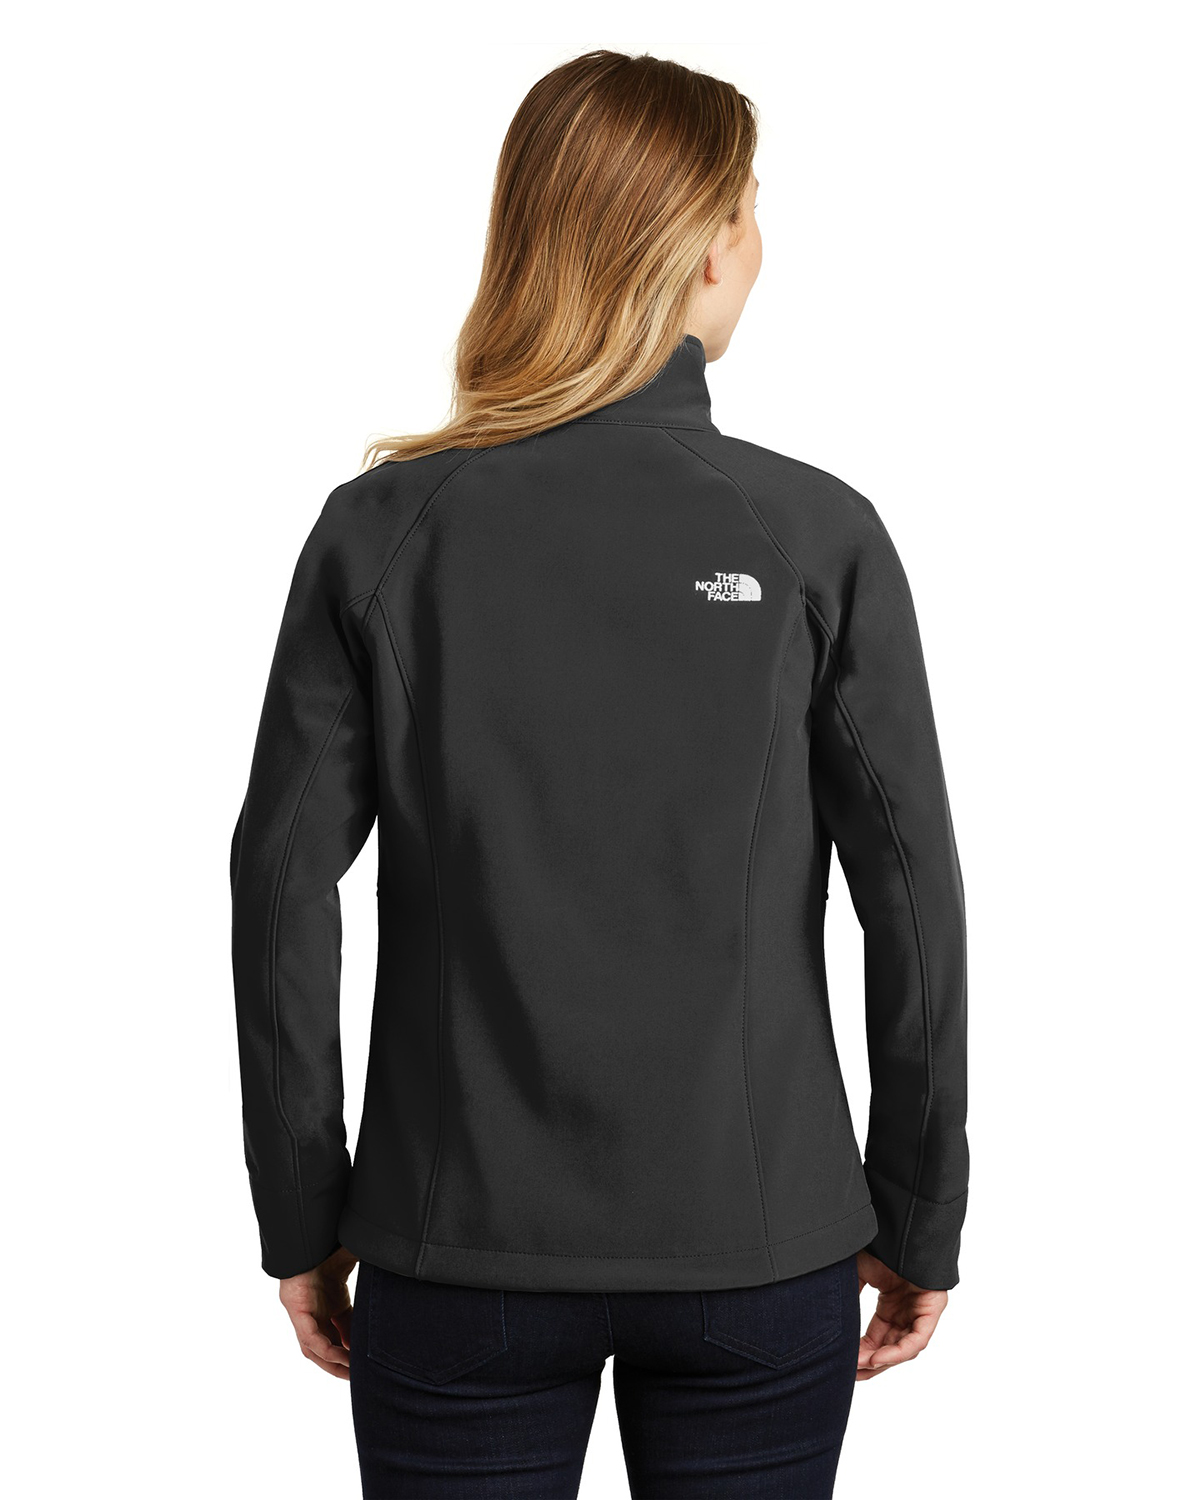 'The North Face NF0A3LGU Ladies Apex Barrier Soft Shell Jacket'